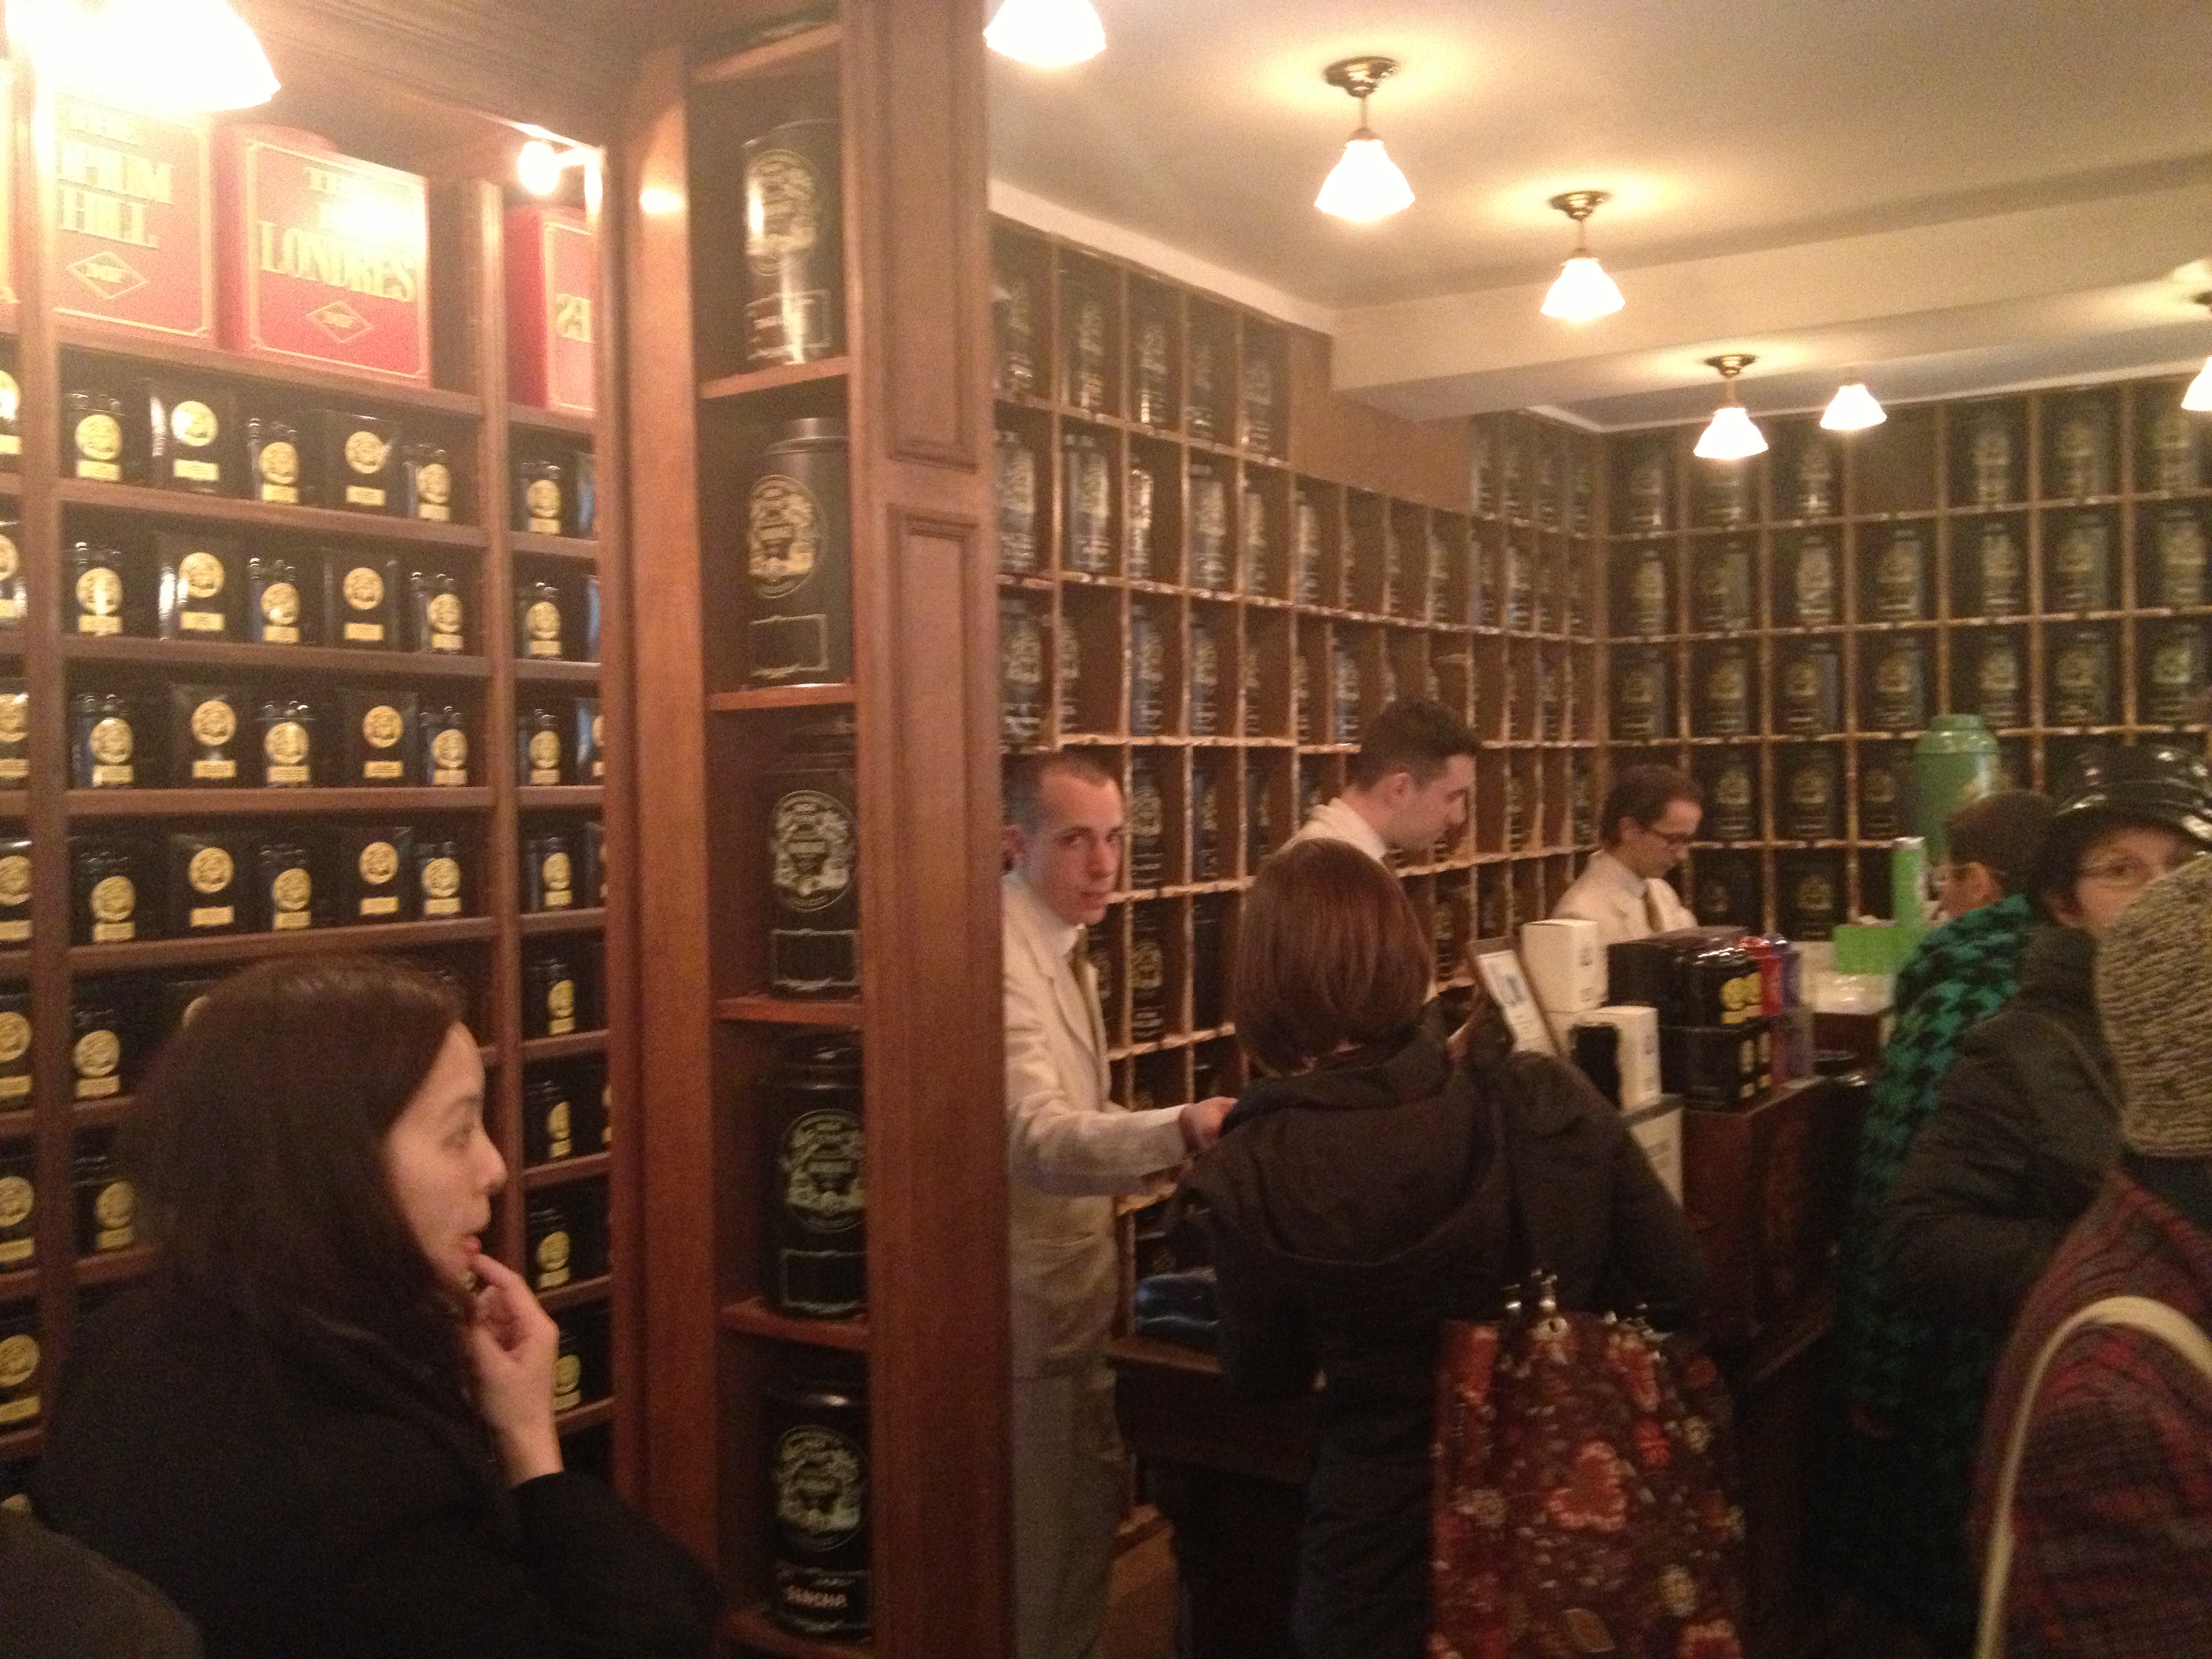 Endless selection of teas from around the world